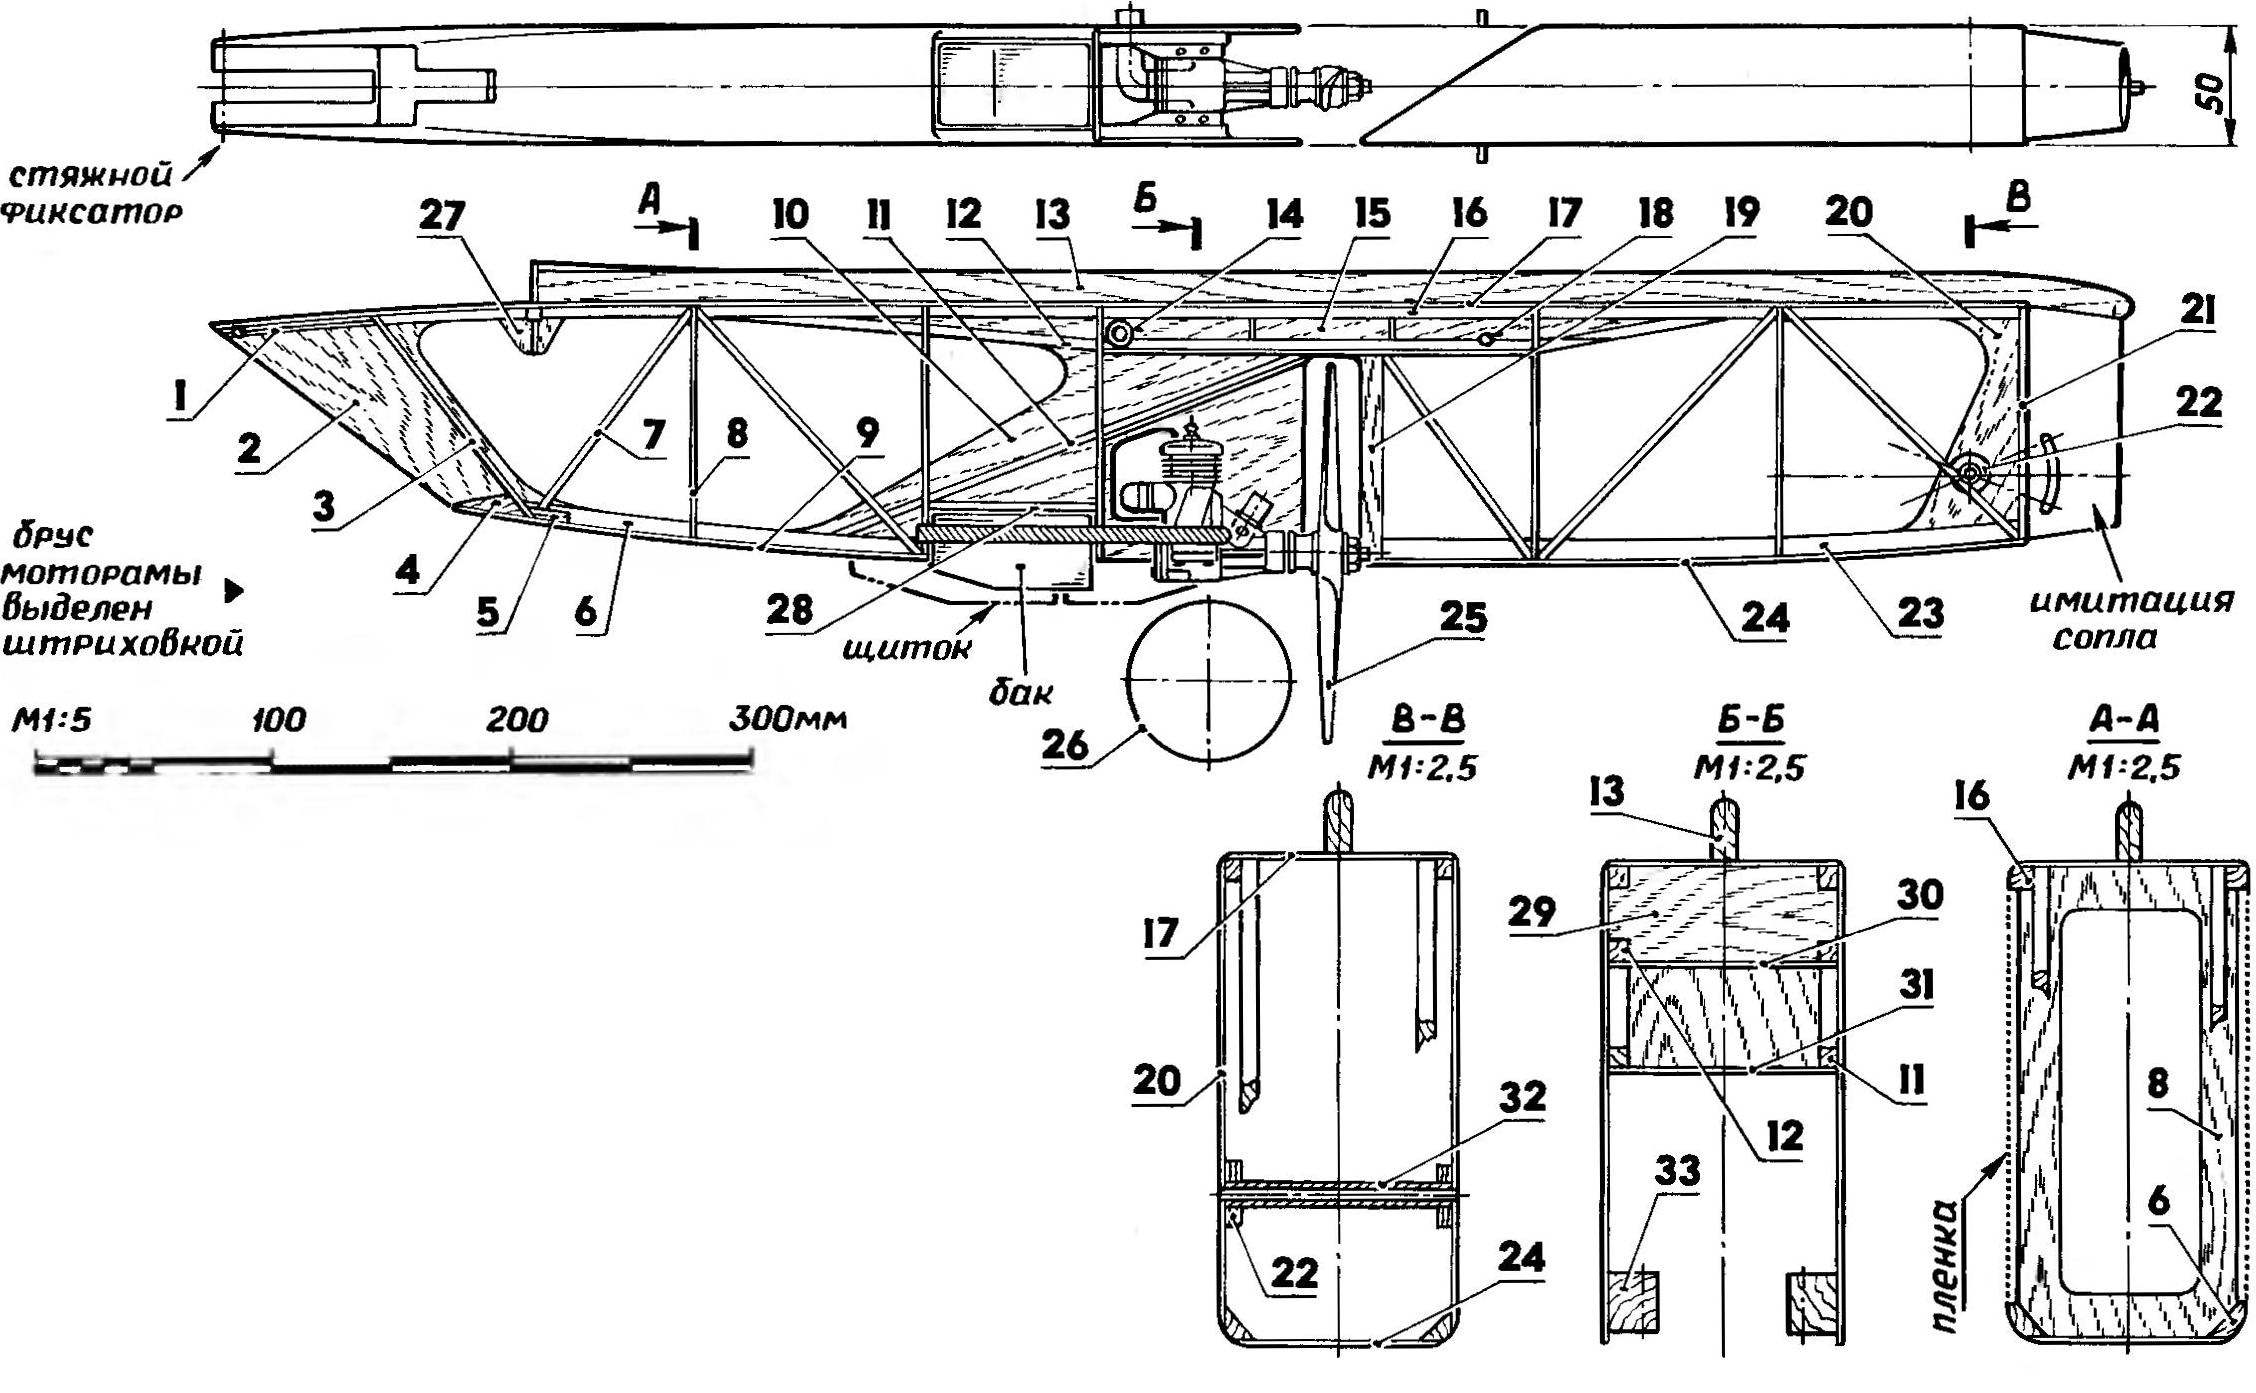 Fig. 2. The Central part of the fuselage